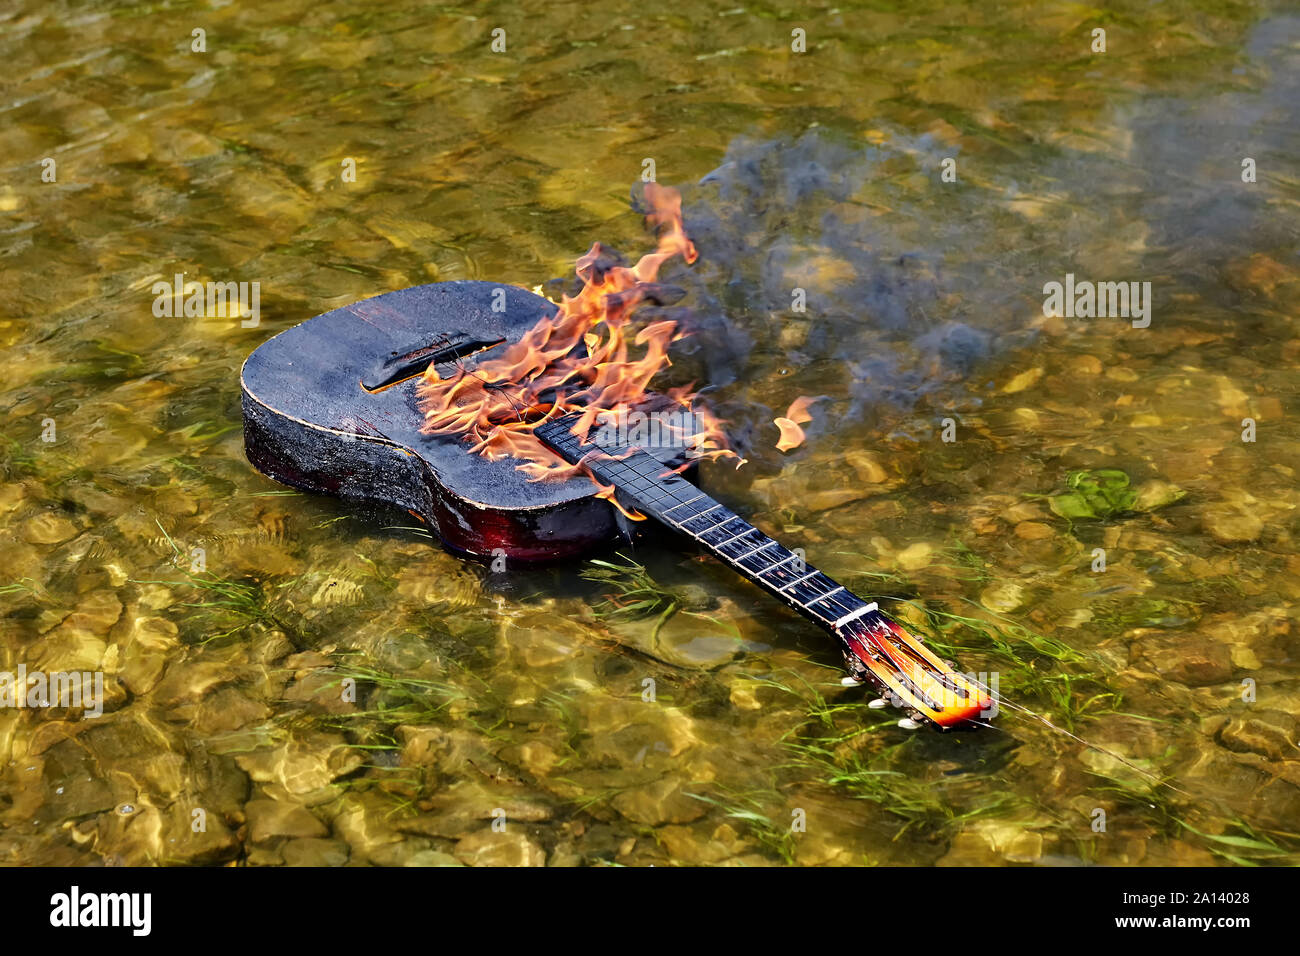 An ignited guitar floats on riverbank, fire burns on its surface. From the flame comes black smoke. The strings are torn. A musical instrument drifts Stock Photo